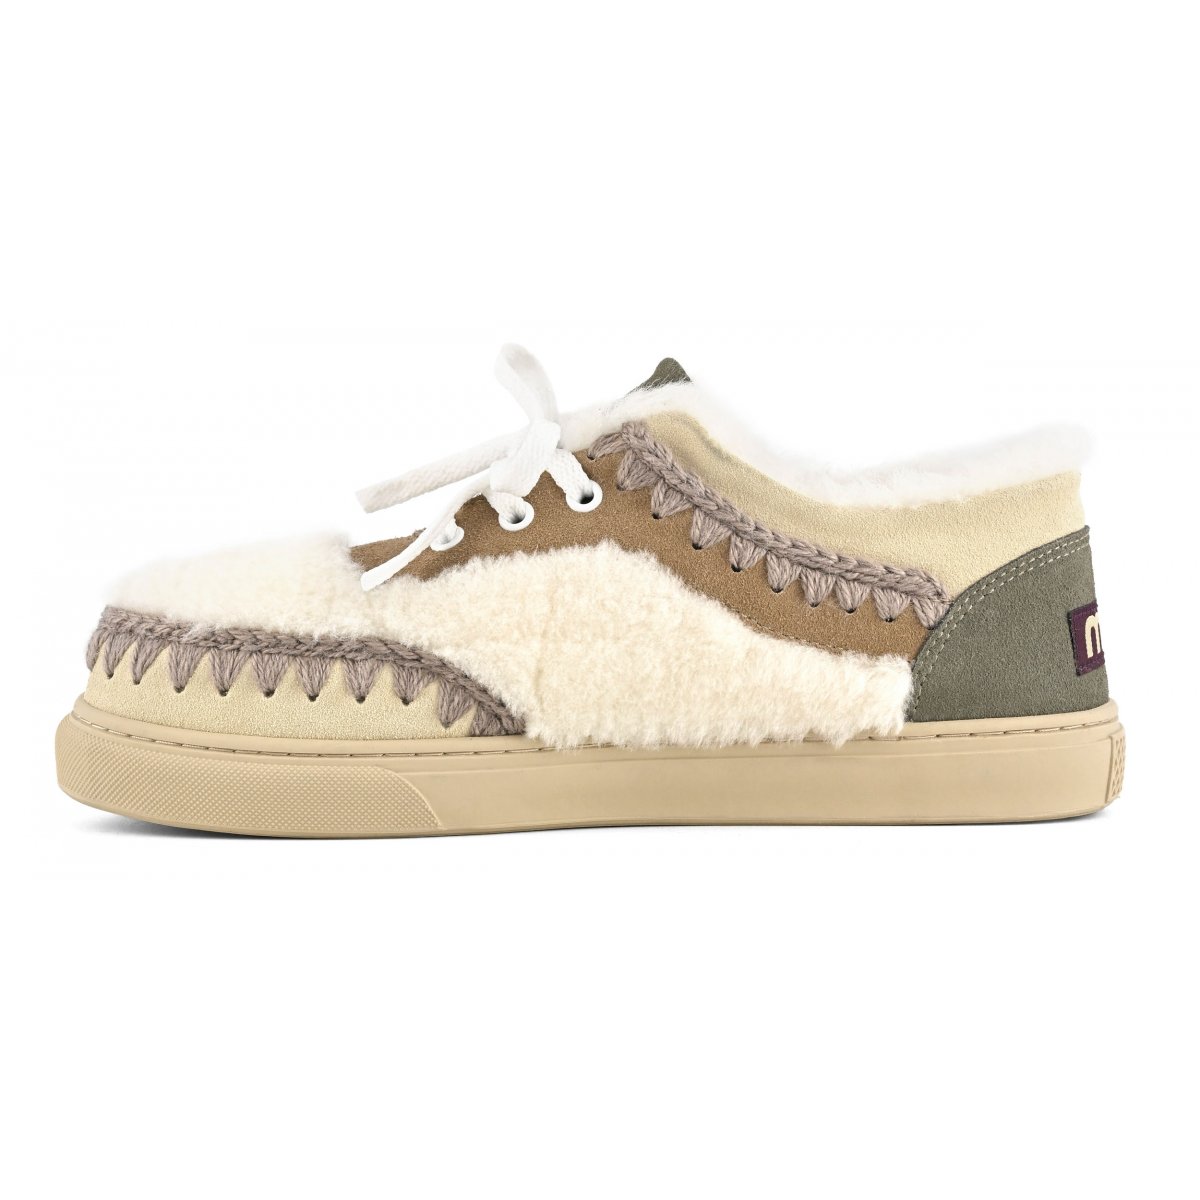 Unisex lace-up sneaker shearling DKST img 5